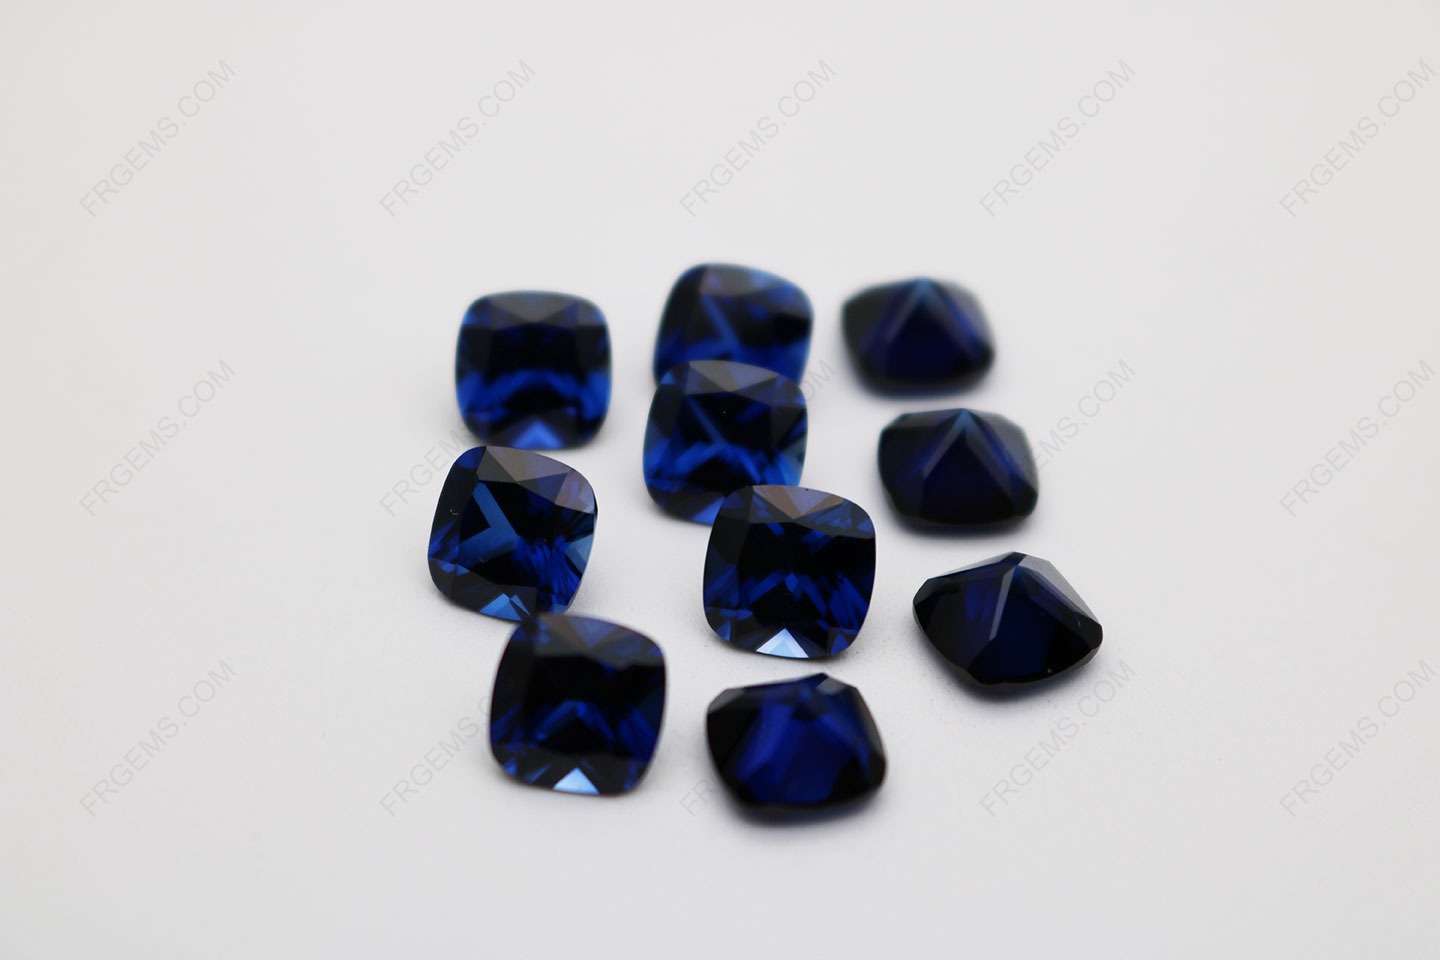 Loose Synthetic Corundum Blue Sapphire 34# Cushion Shape Faceted Cut 8x8mm stones IMG_0932